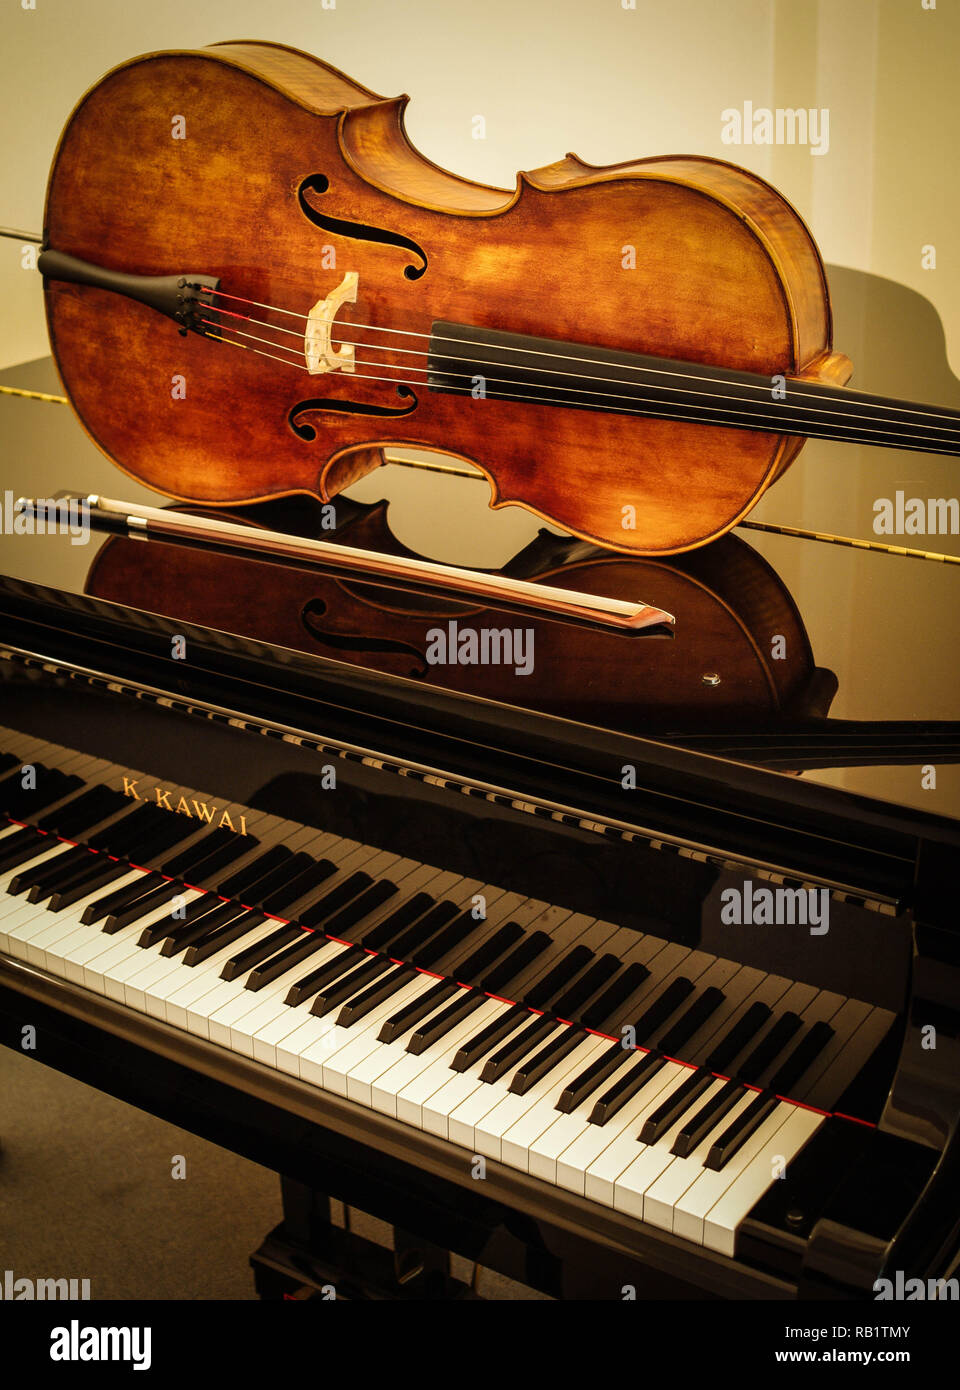 Cello and bow on grand piano with cream background Stock Photo - Alamy